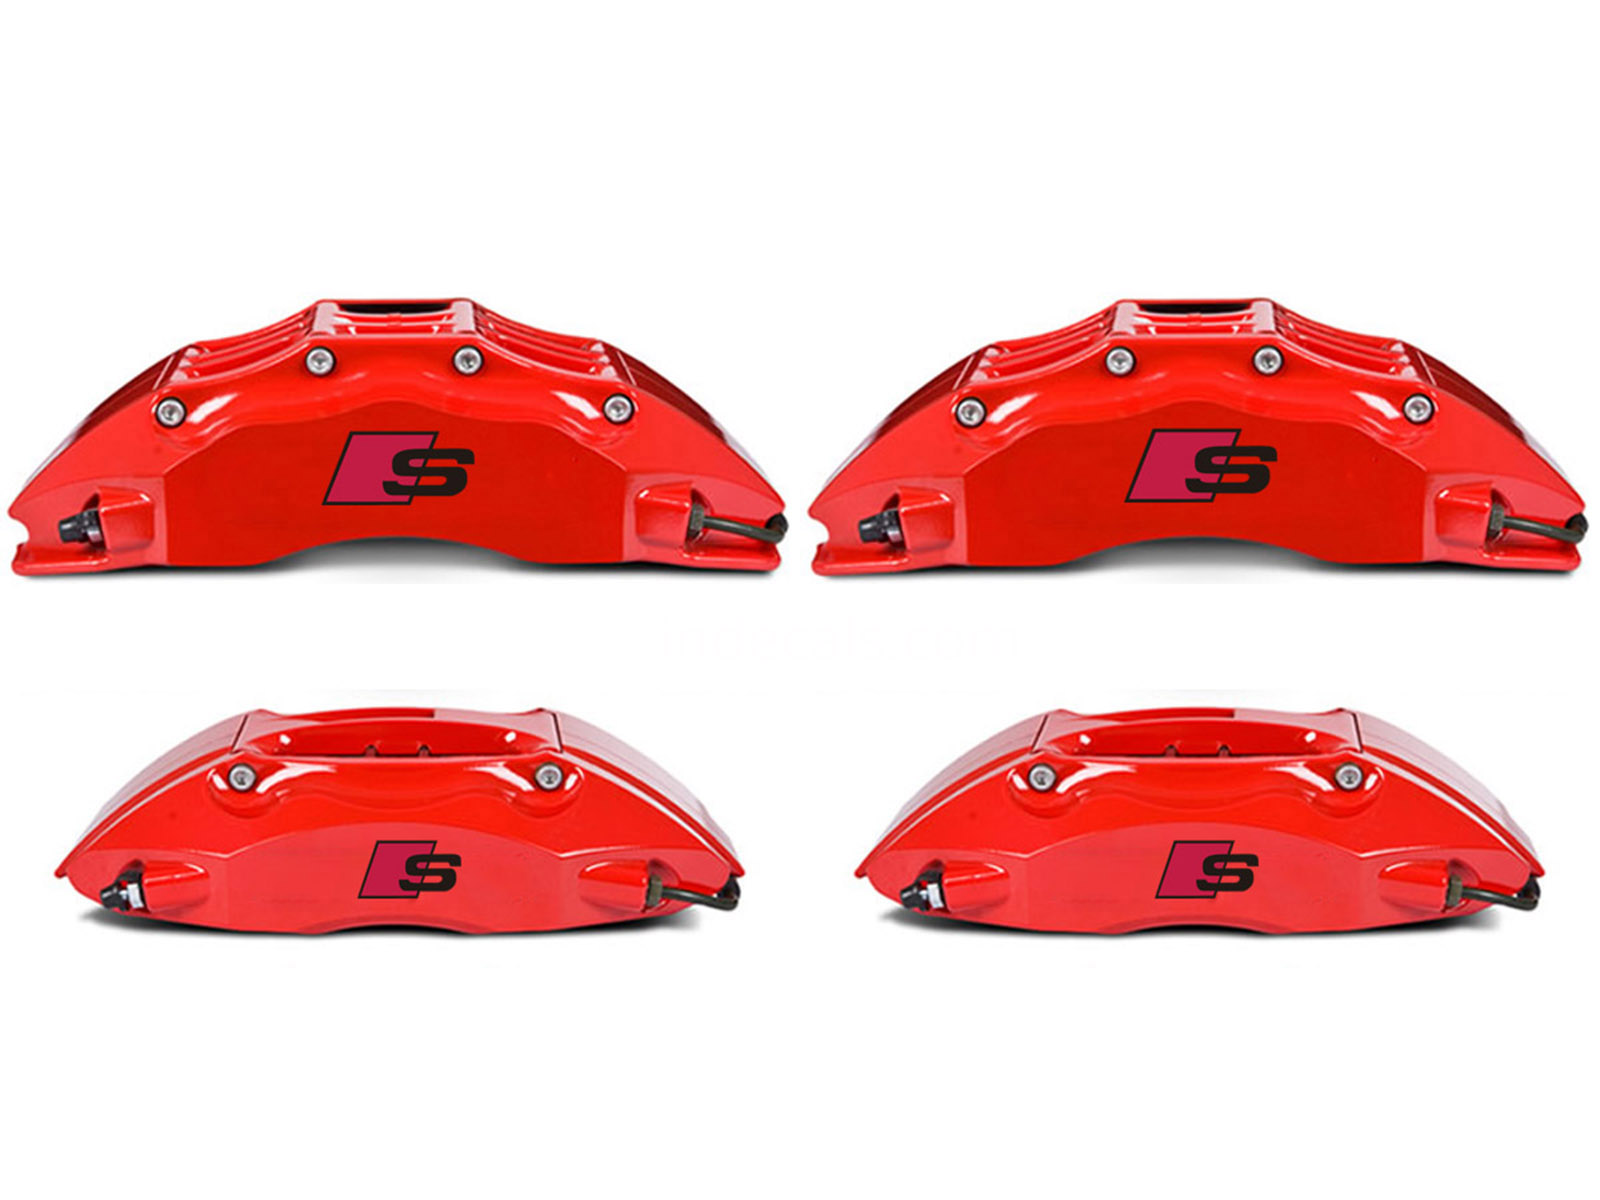 4 x Audi S-Line Stickers for Brake Calipers - Black + Red